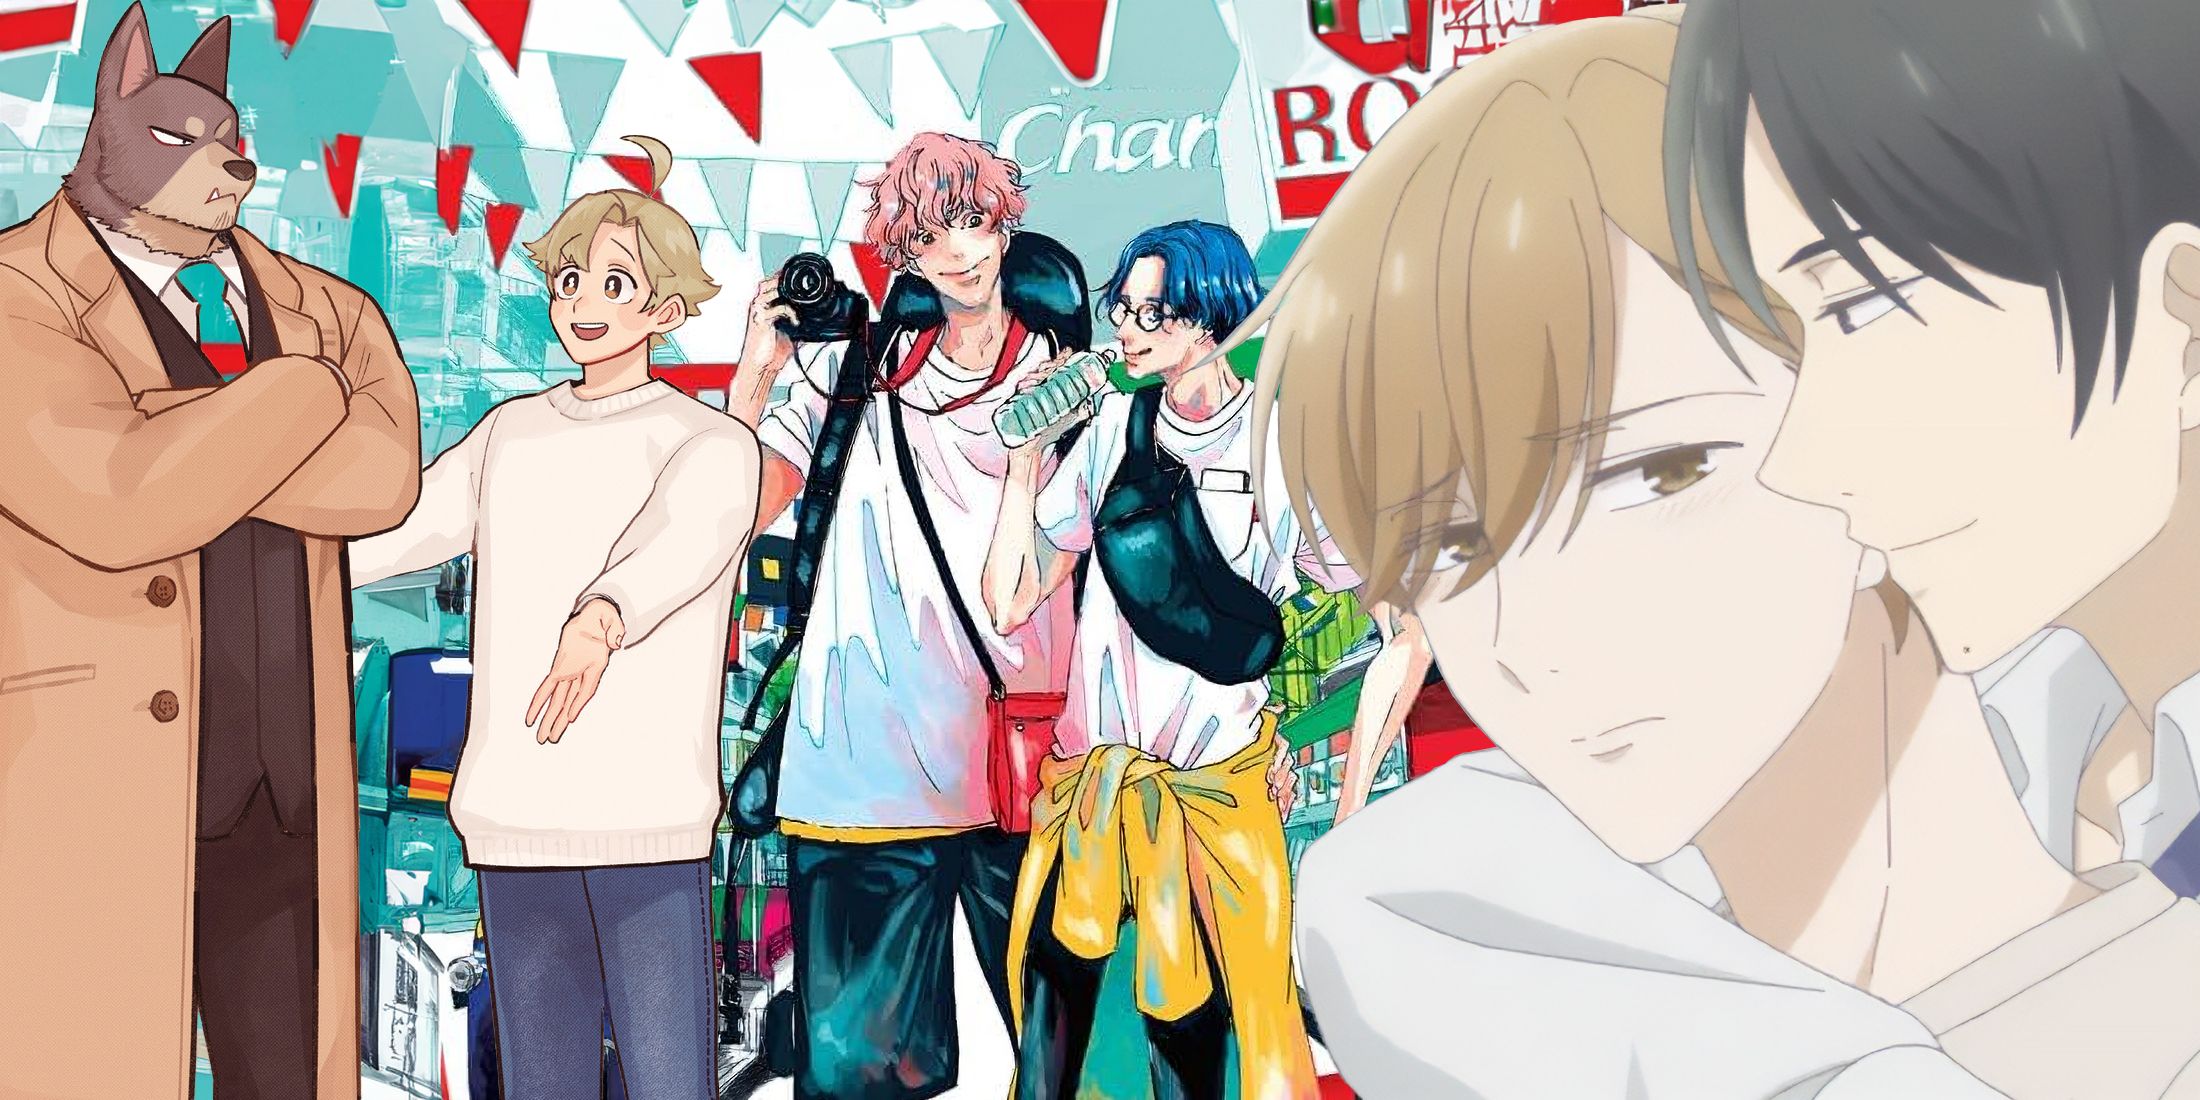 14-Best-BL-Manga-With-Official-English-Translations